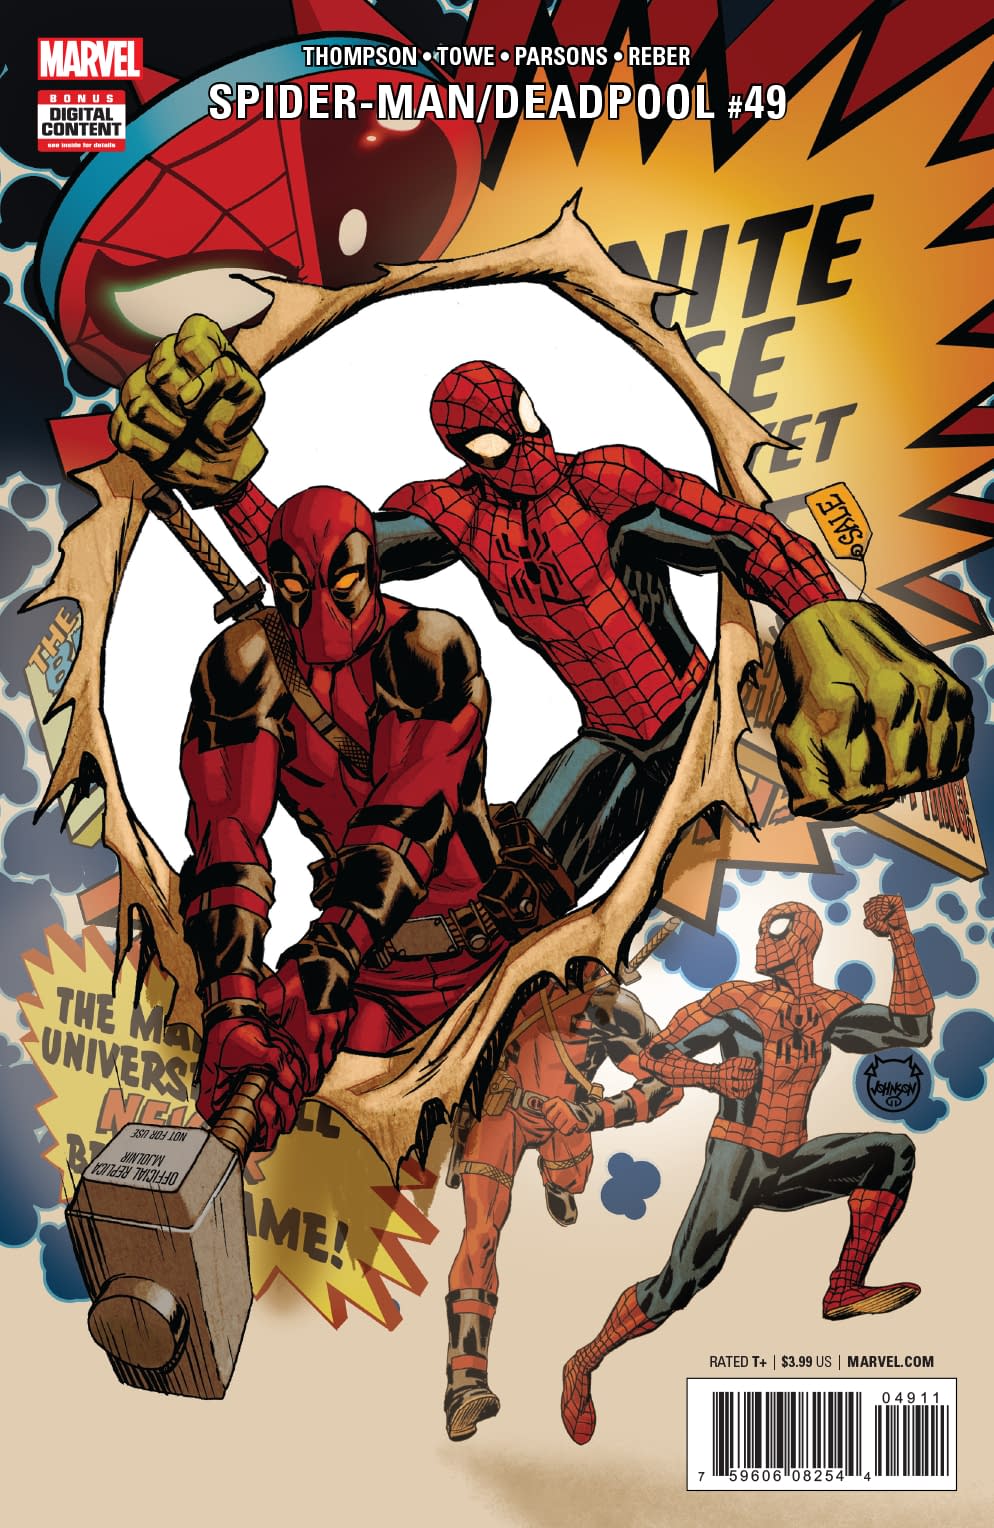 Why Deadpool is Smarter Than Reed Richards in Next Week's Spider-Man/Deadpool #49